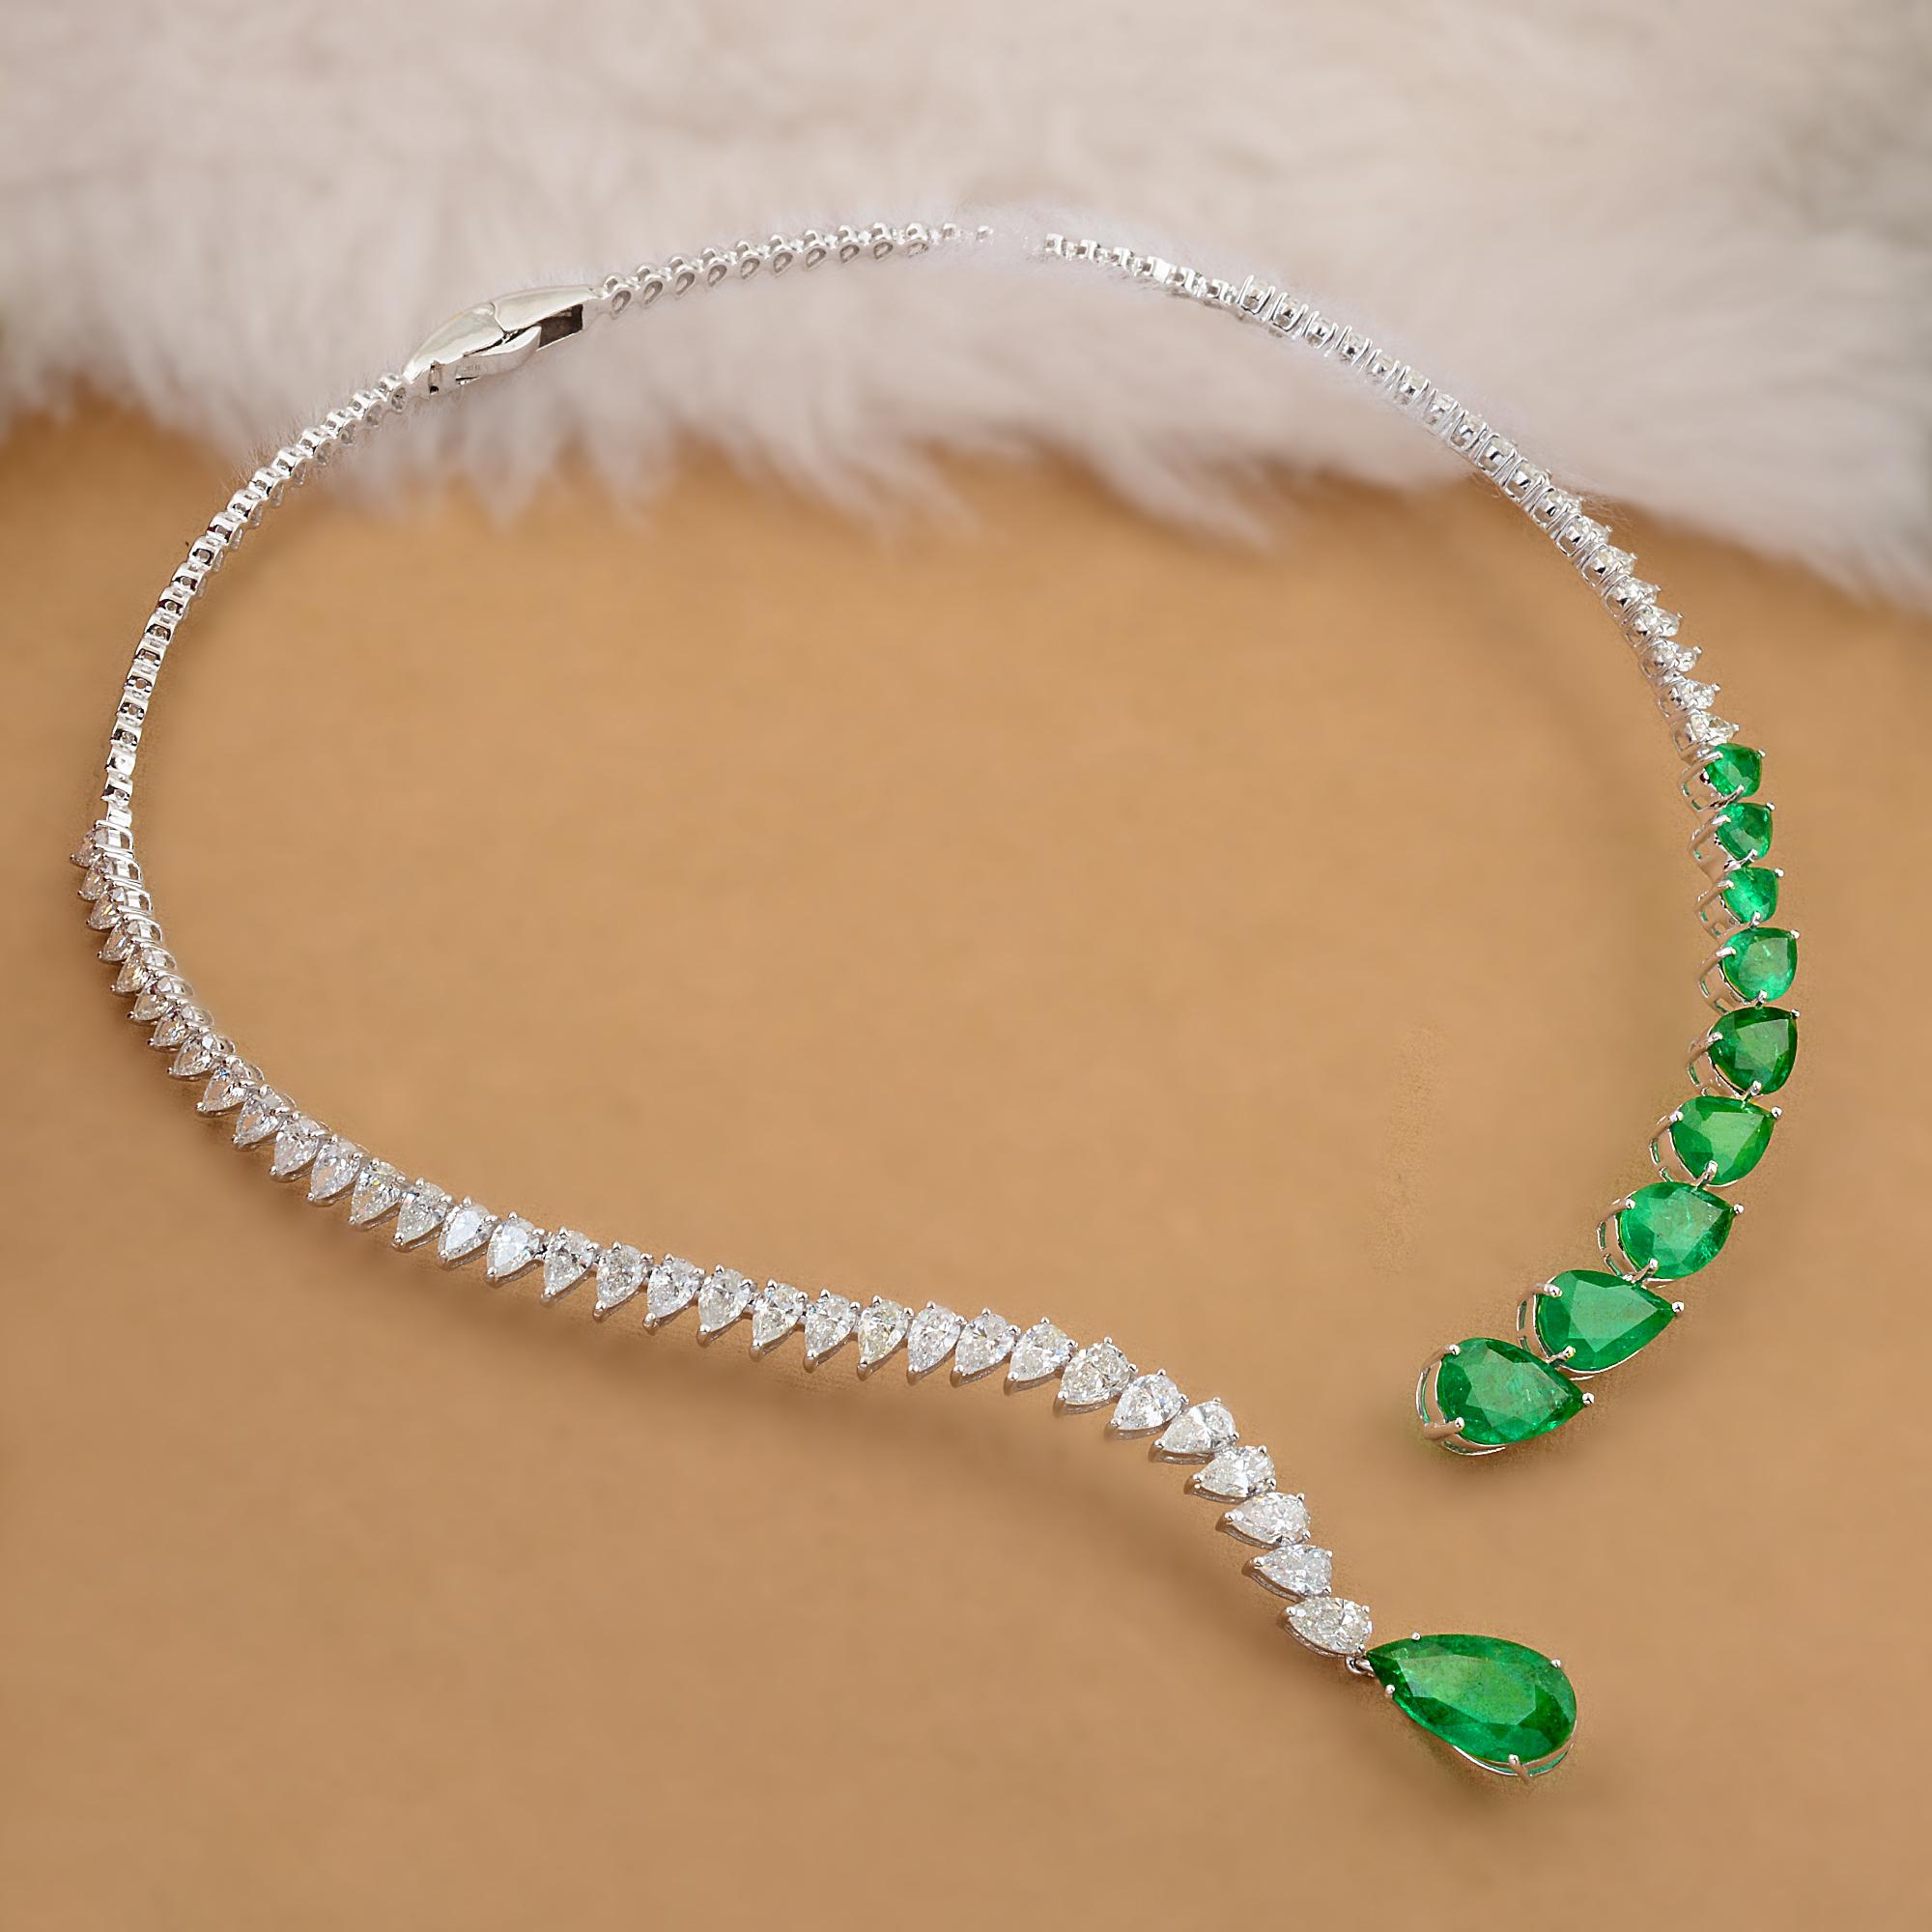 This Pear Natural Emerald Gemstone Collar Choker Necklace is a versatile accessory that can be worn for various occasions. Whether it's a formal event, a romantic evening, or a special celebration, it effortlessly adds a touch of elegance and luxury